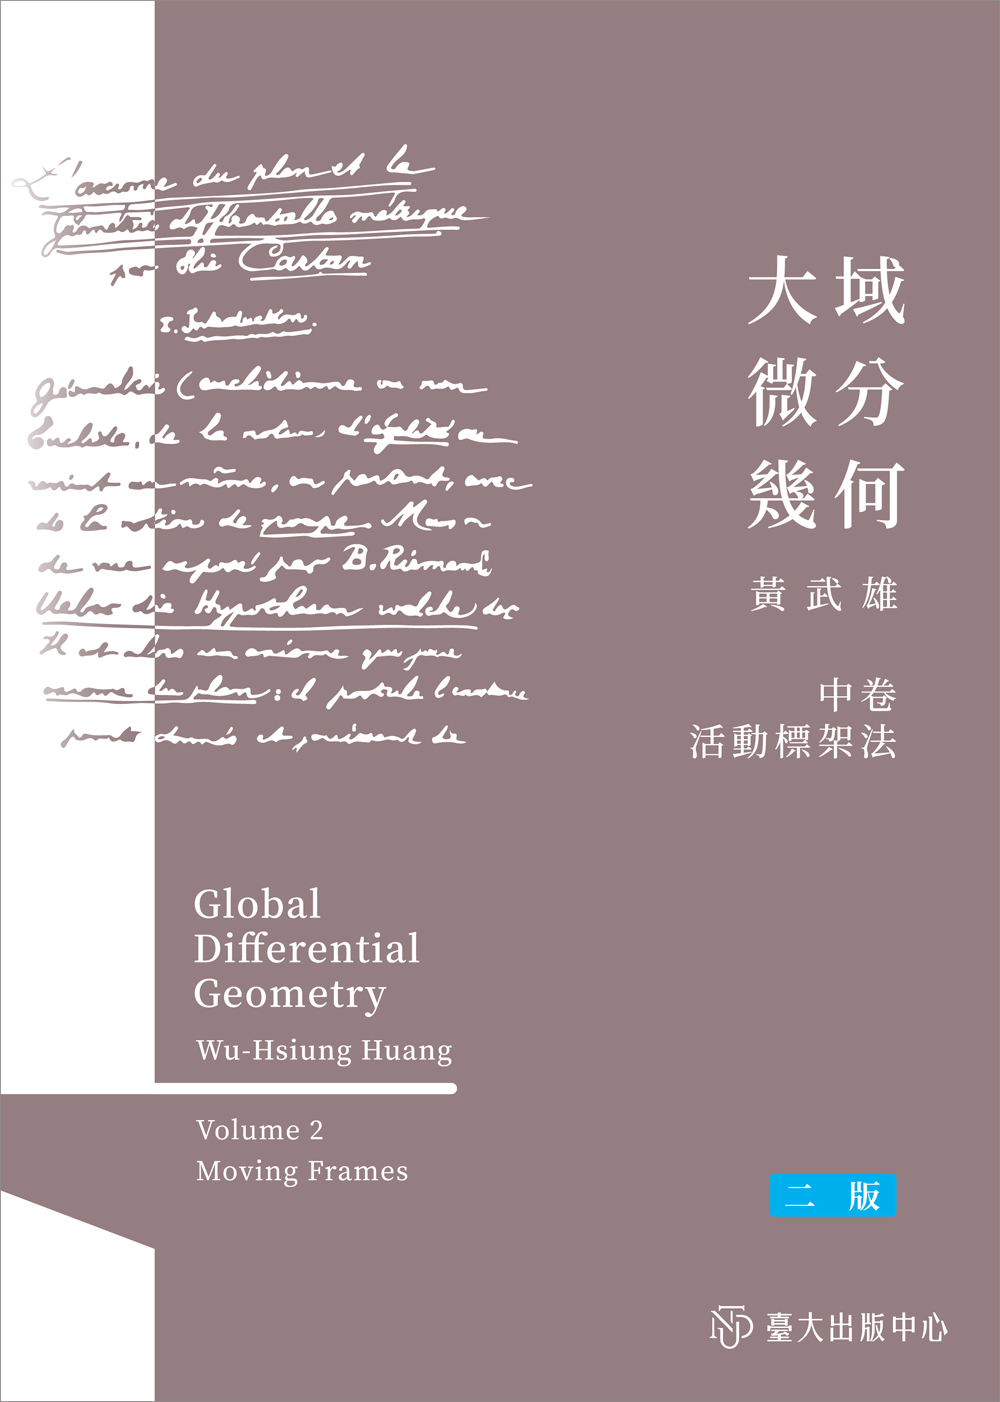 Global Differential Geometry Vol 2: Moving Frame (2nd edition)